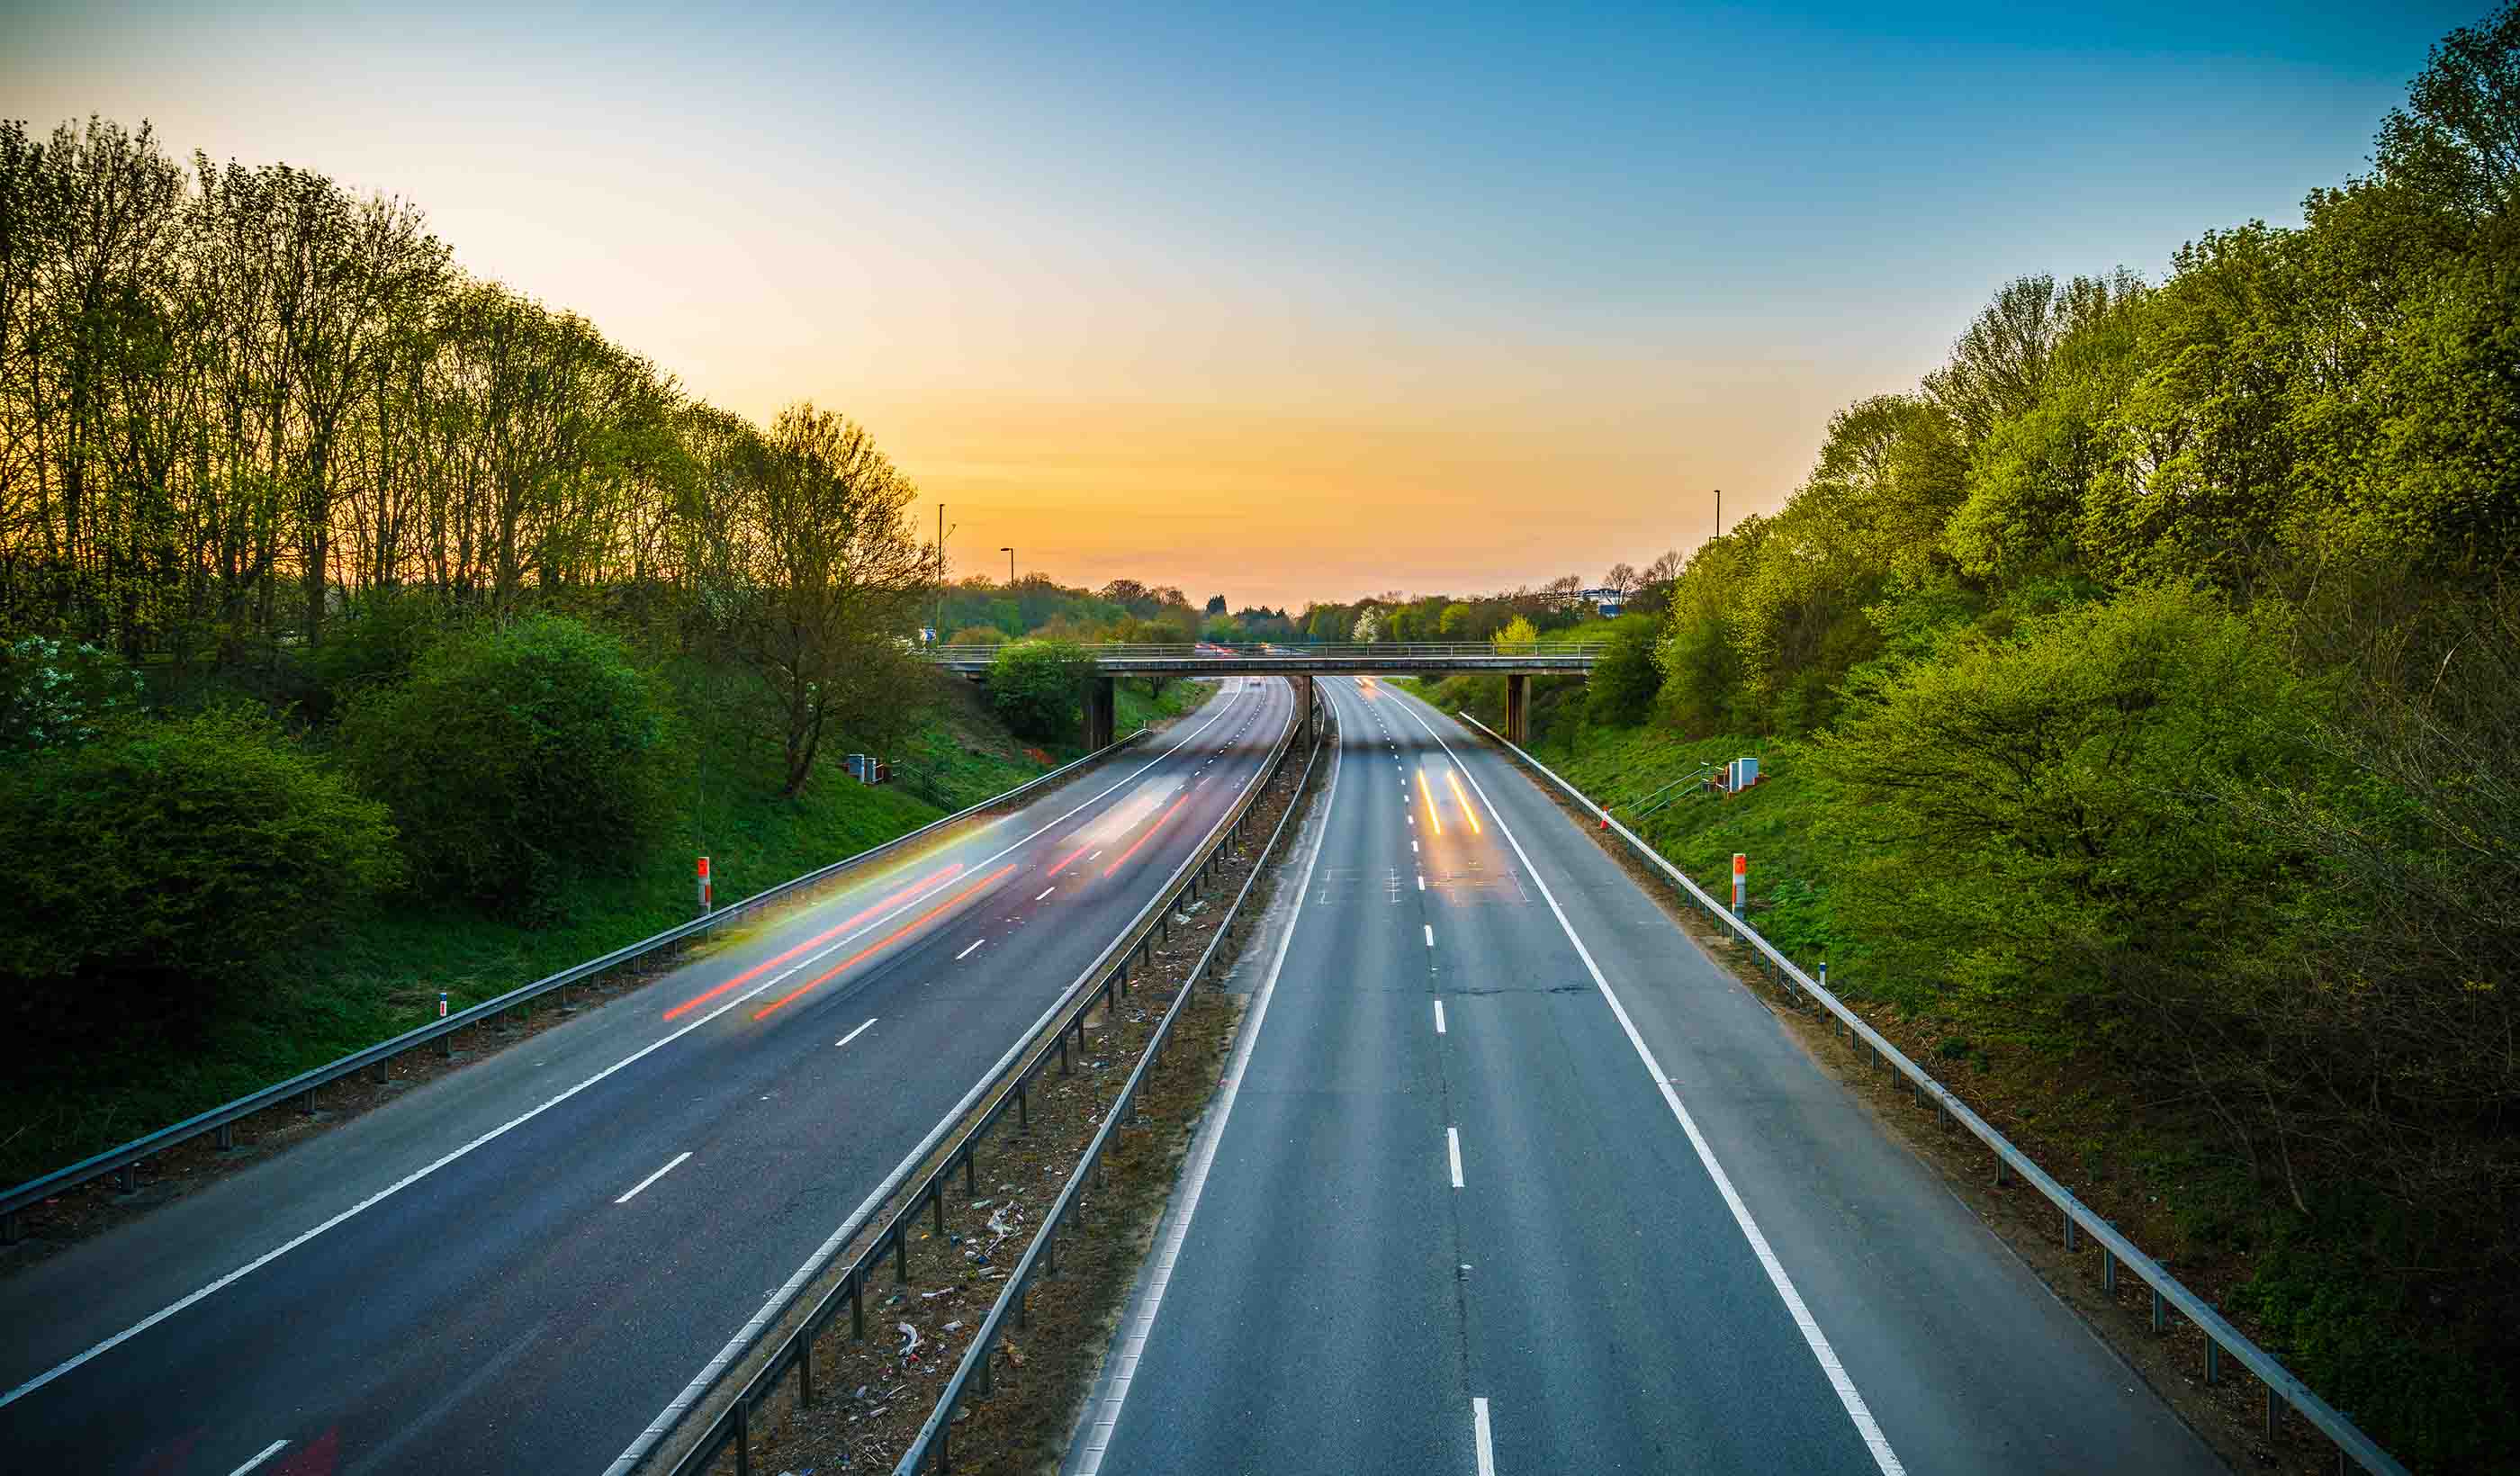 Reducing carbon on UK’s road schemes: actions to take for the sake of climate change